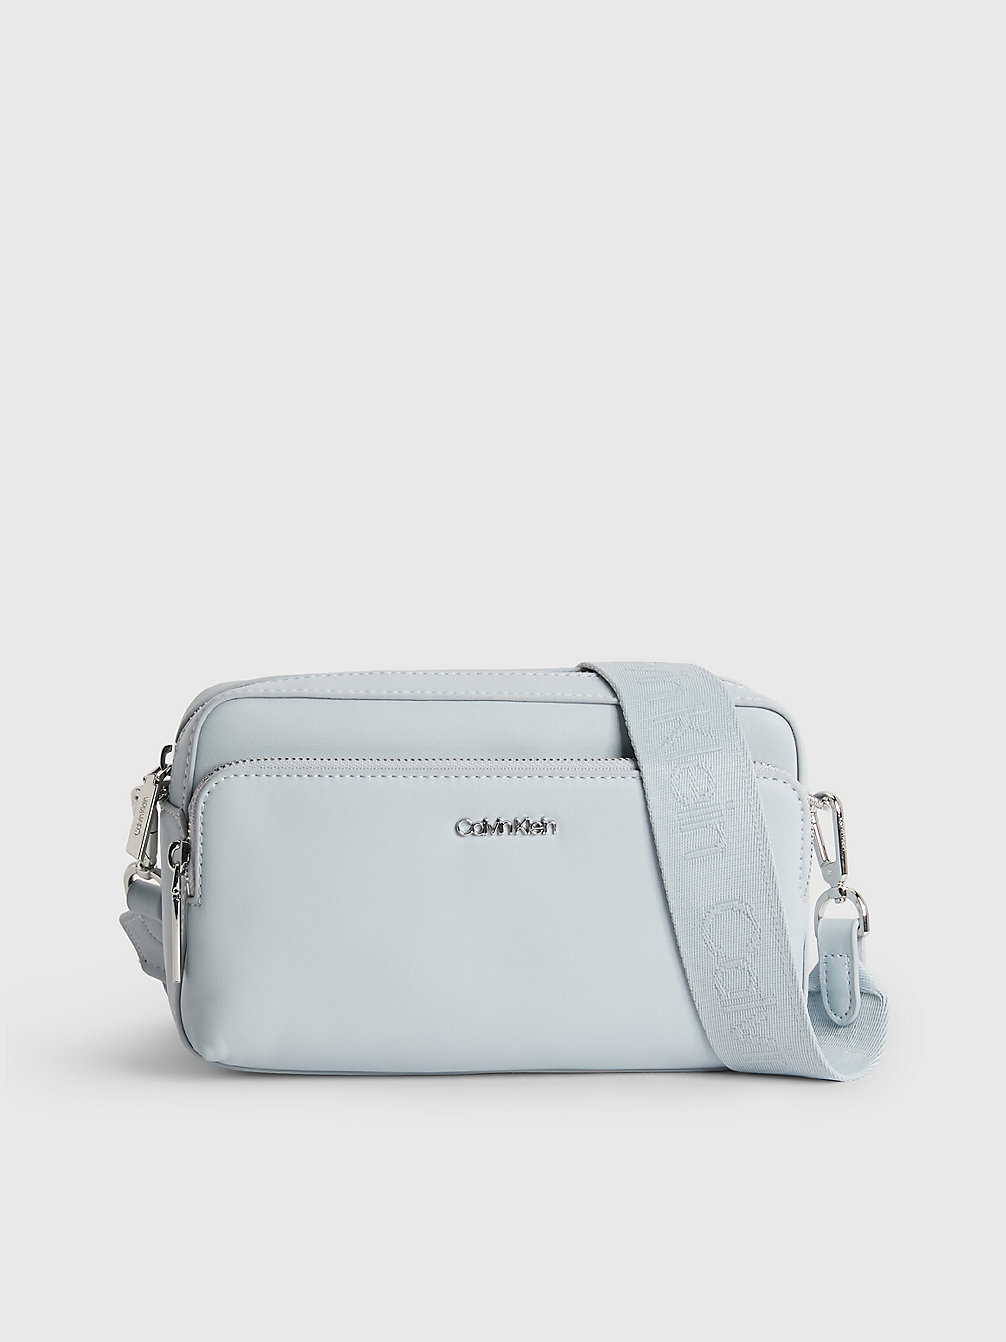 PEARL BLUE Large Recycled Crossbody Bag undefined women Calvin Klein